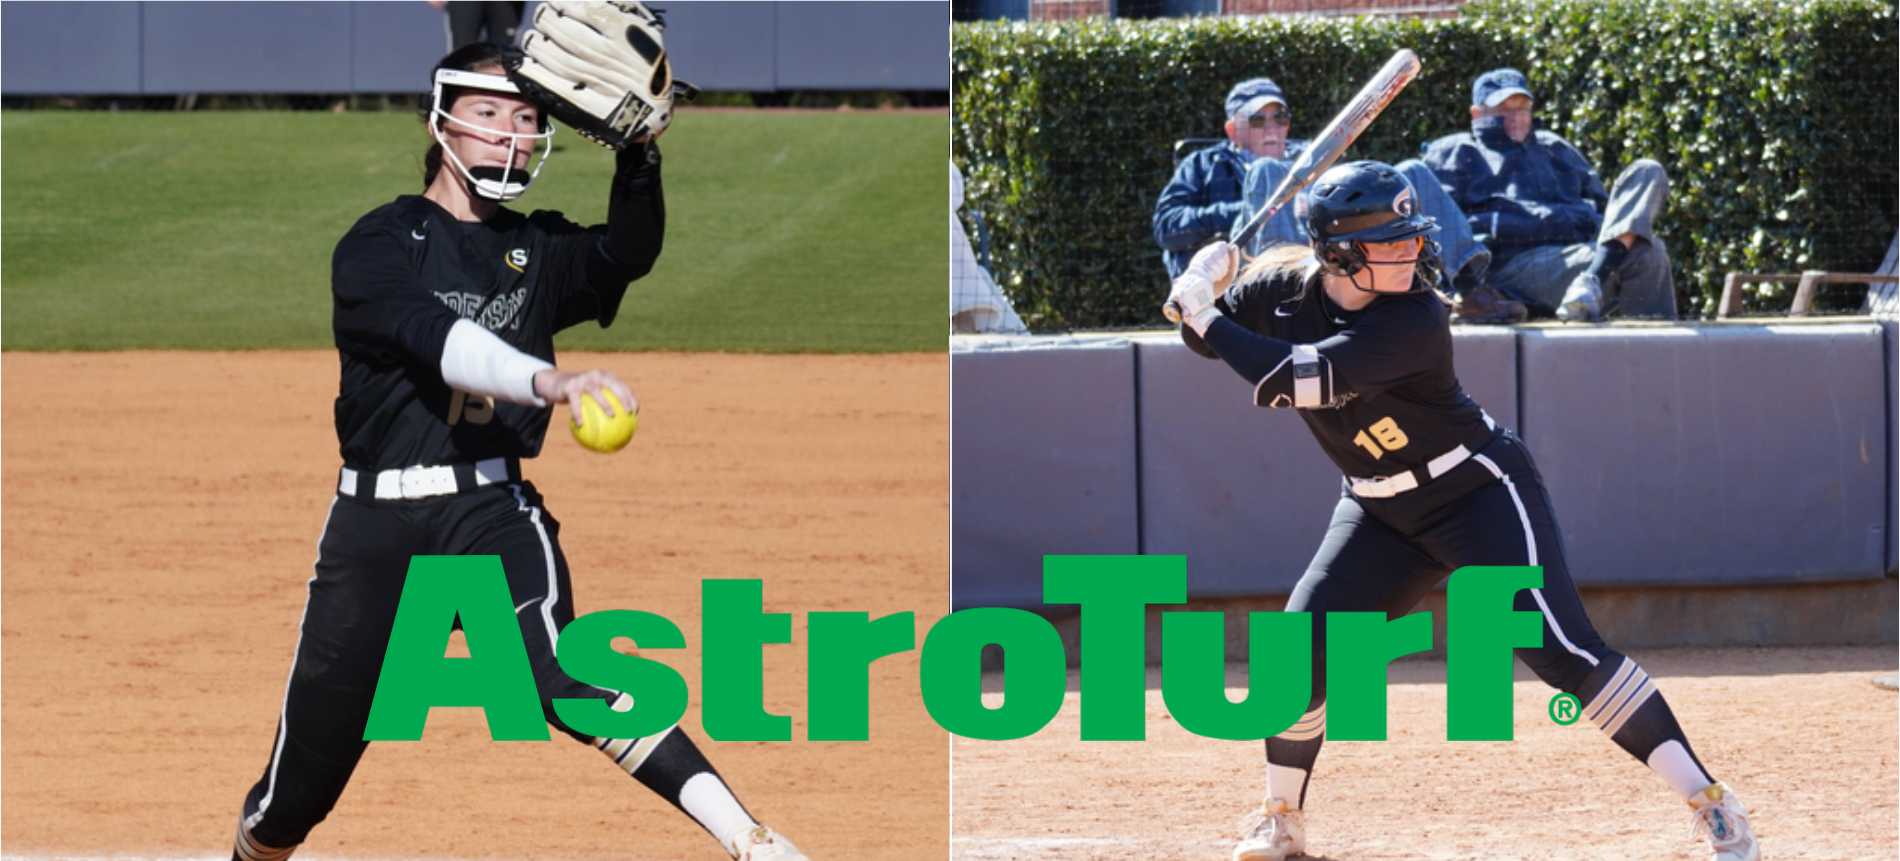 Boatner and Maxwell Named South Atlantic Conference Astroturf Softball Players of the Week